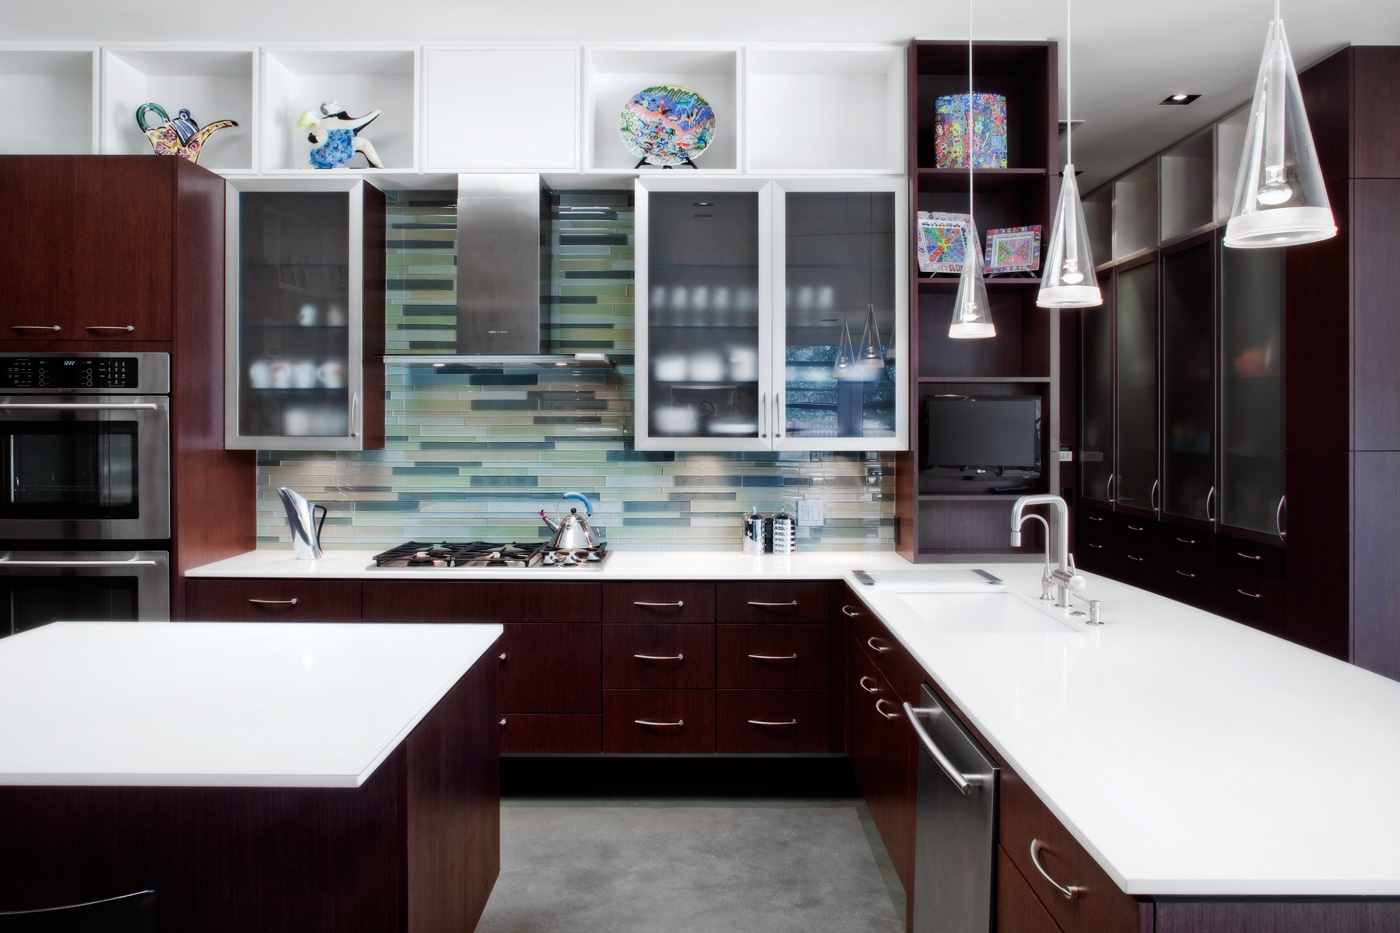 Modern kitchen with dark wood cabinetry and metal appliances.